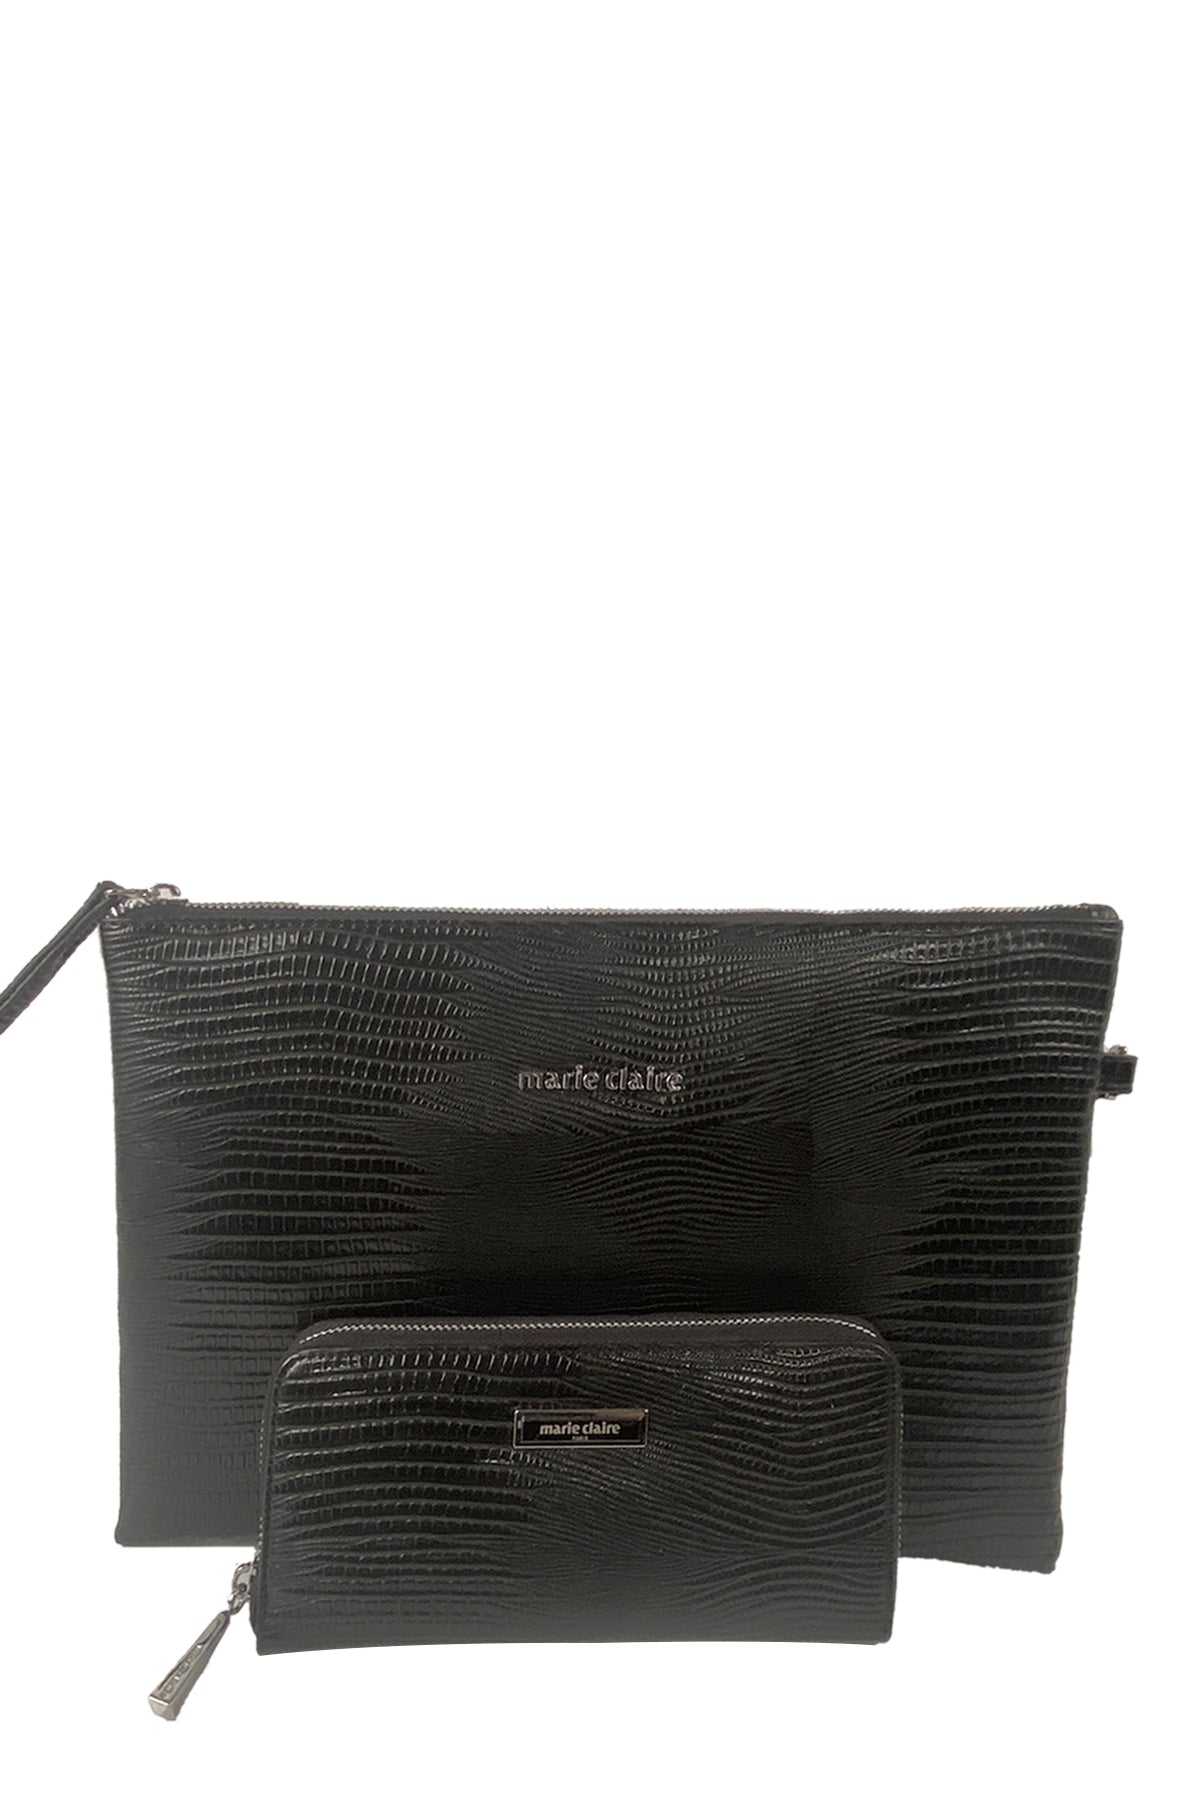 Marie Claire Paris Marie Claire tote bag in black faux leather with printed  logo 3325POSS4026N, black women bag black bag women black marie claire bag  - 3325poss4026n - Poșete Marie Claire Paris -